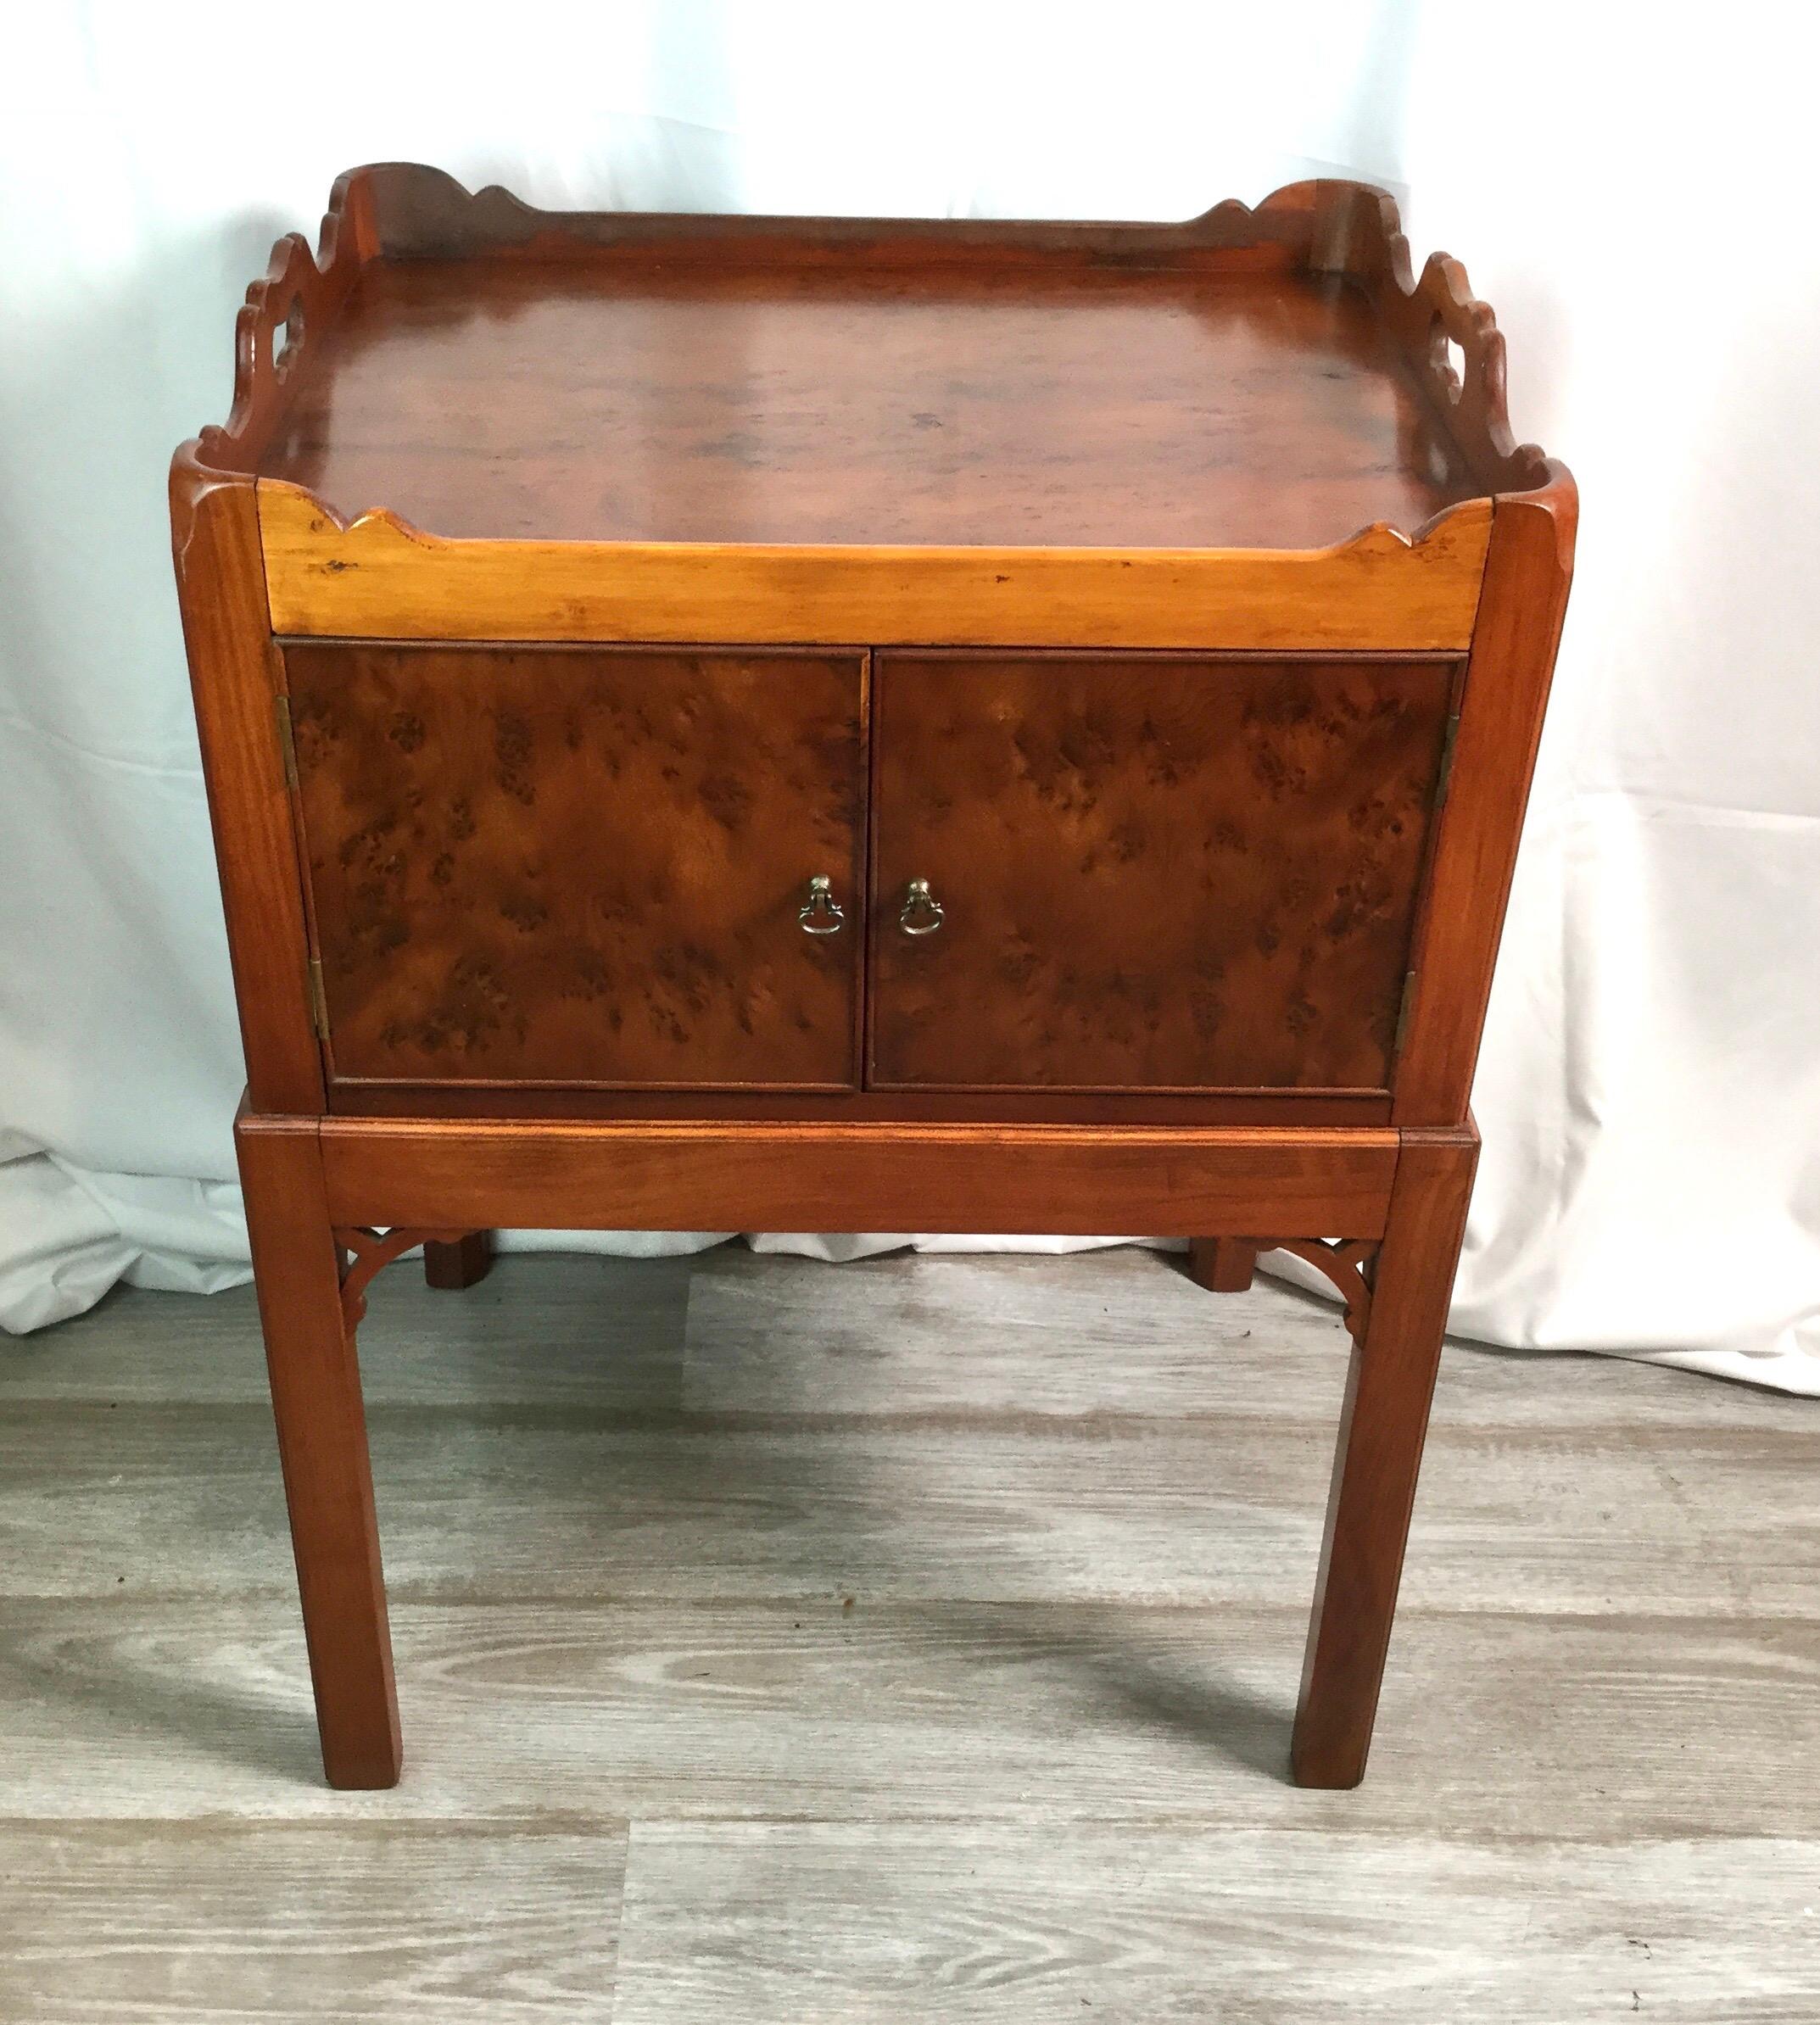 Beautiful Yew wood cabinet on frame with great gallery top. Measures: 20 1/2